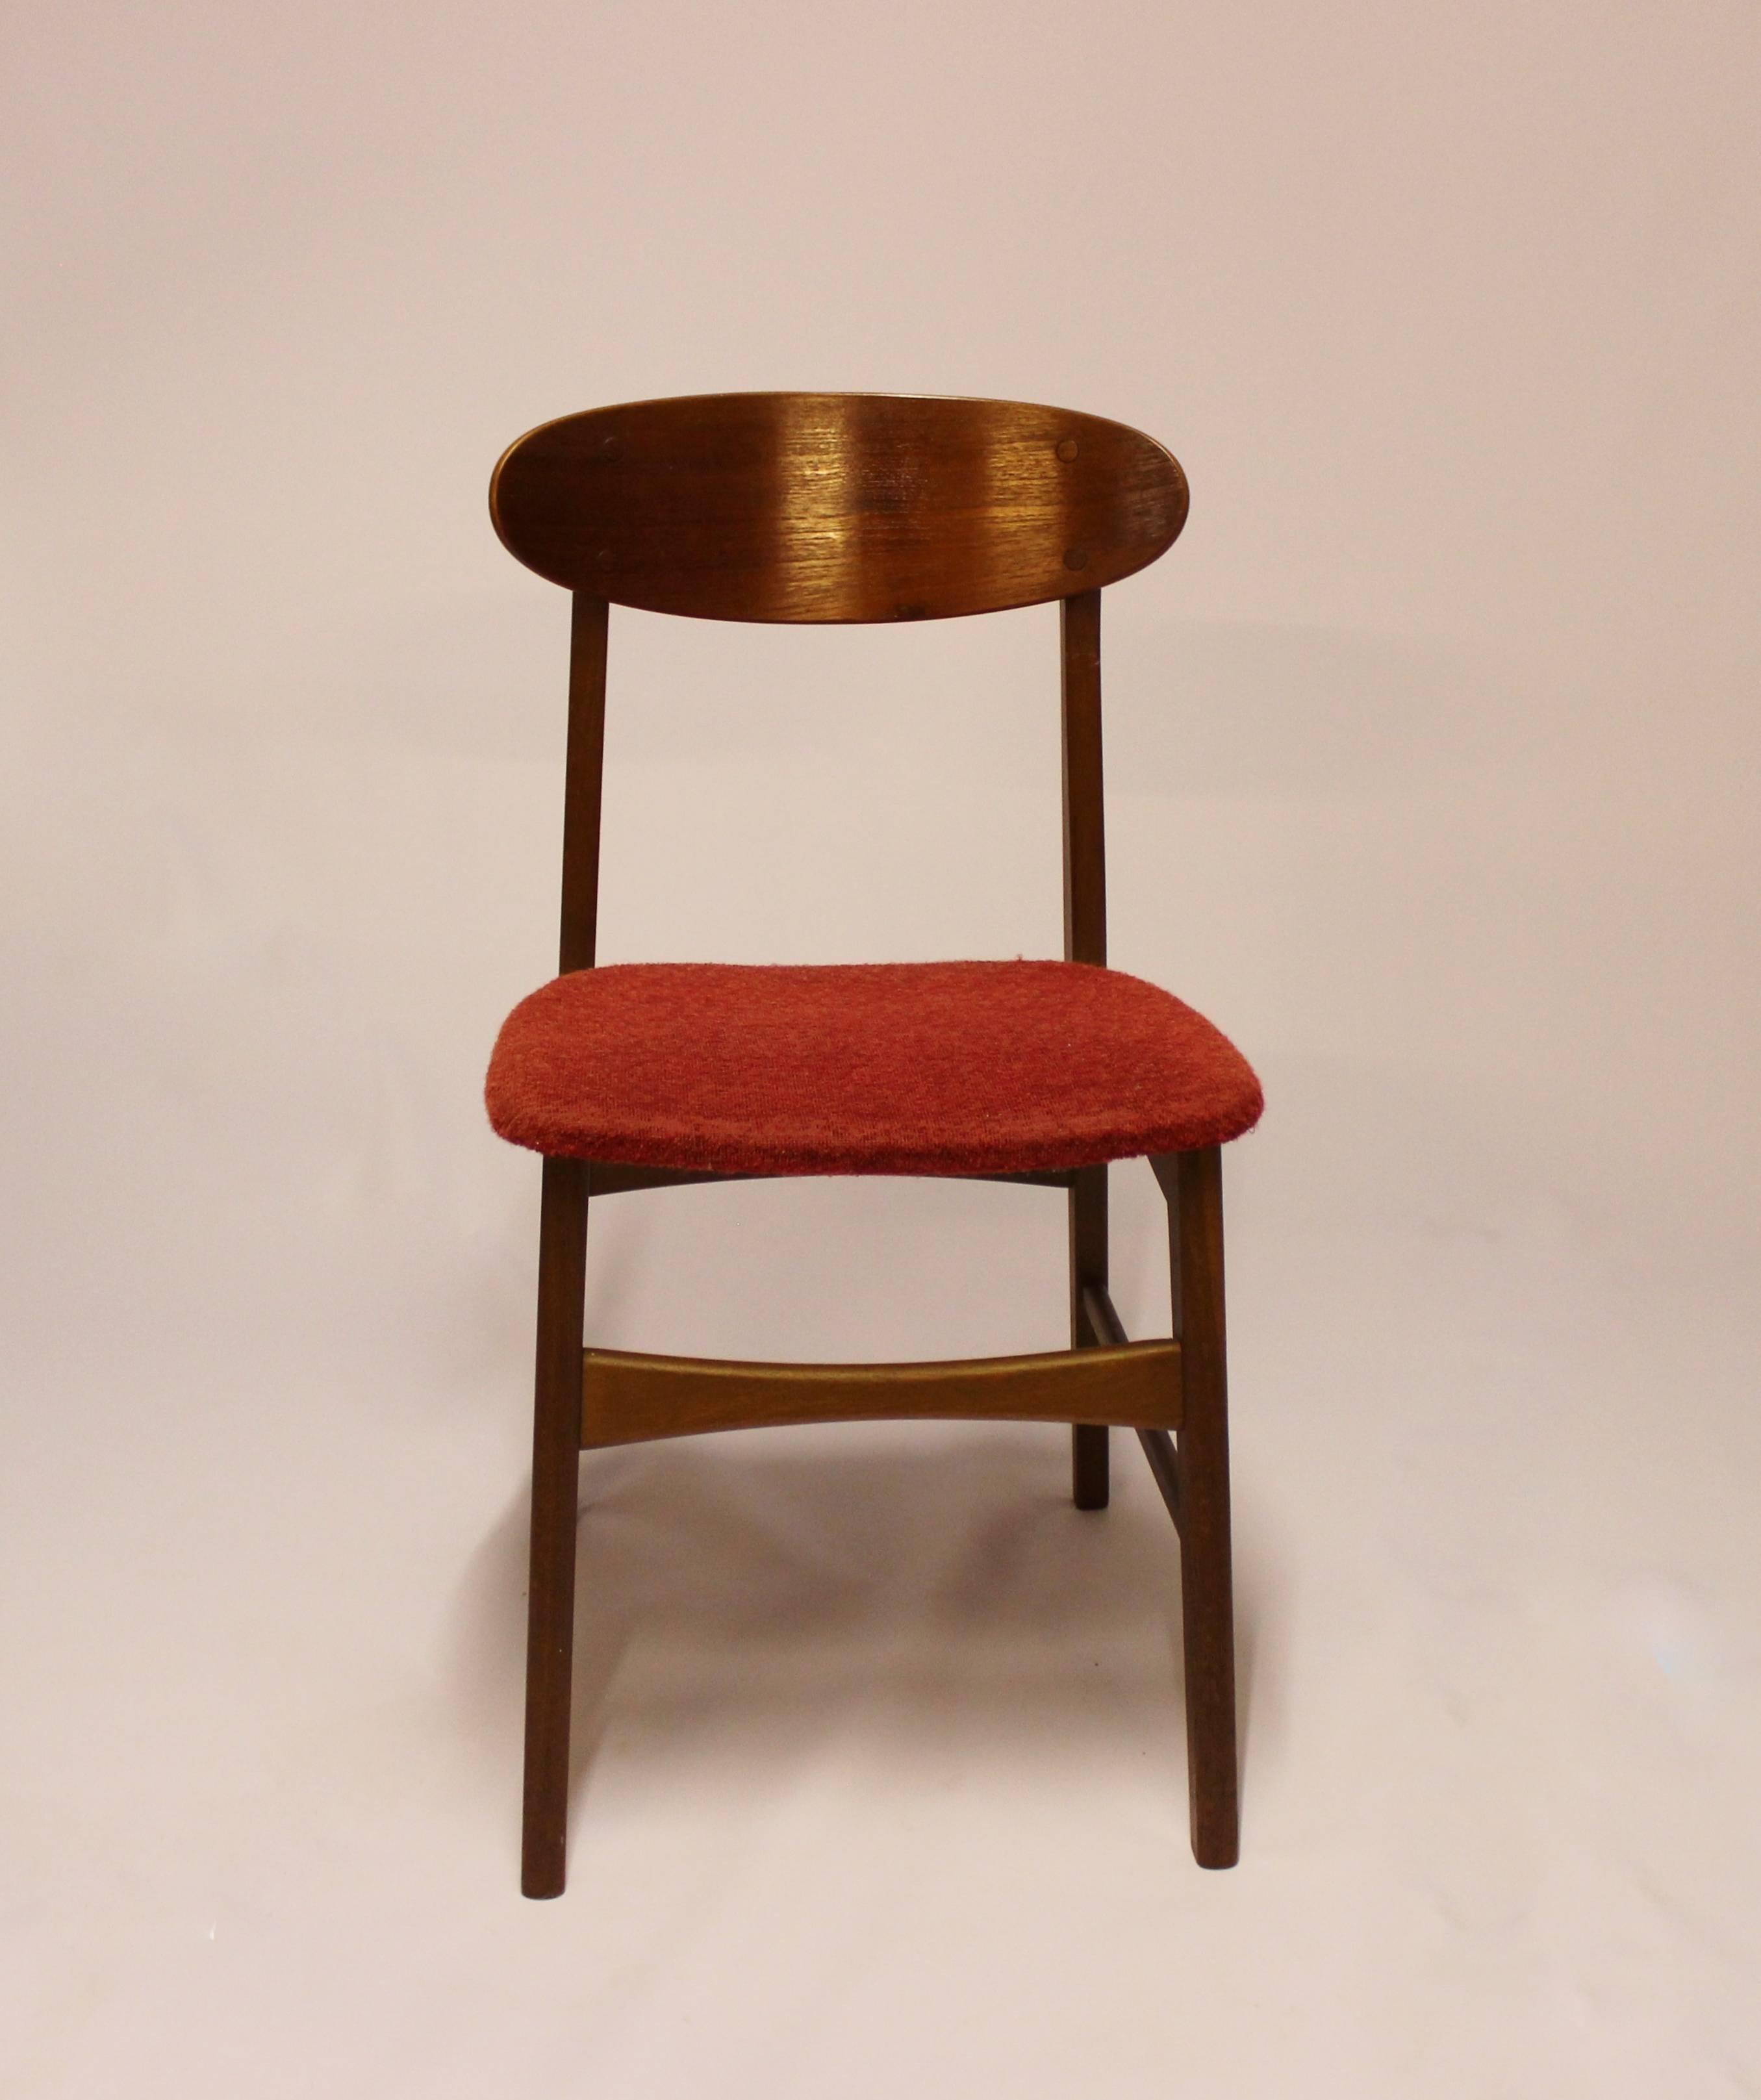 A set of four dining room chairs in teak and upholstered with red fabric, of Danish design from the 1960s. The chairs are in great vintage condition.